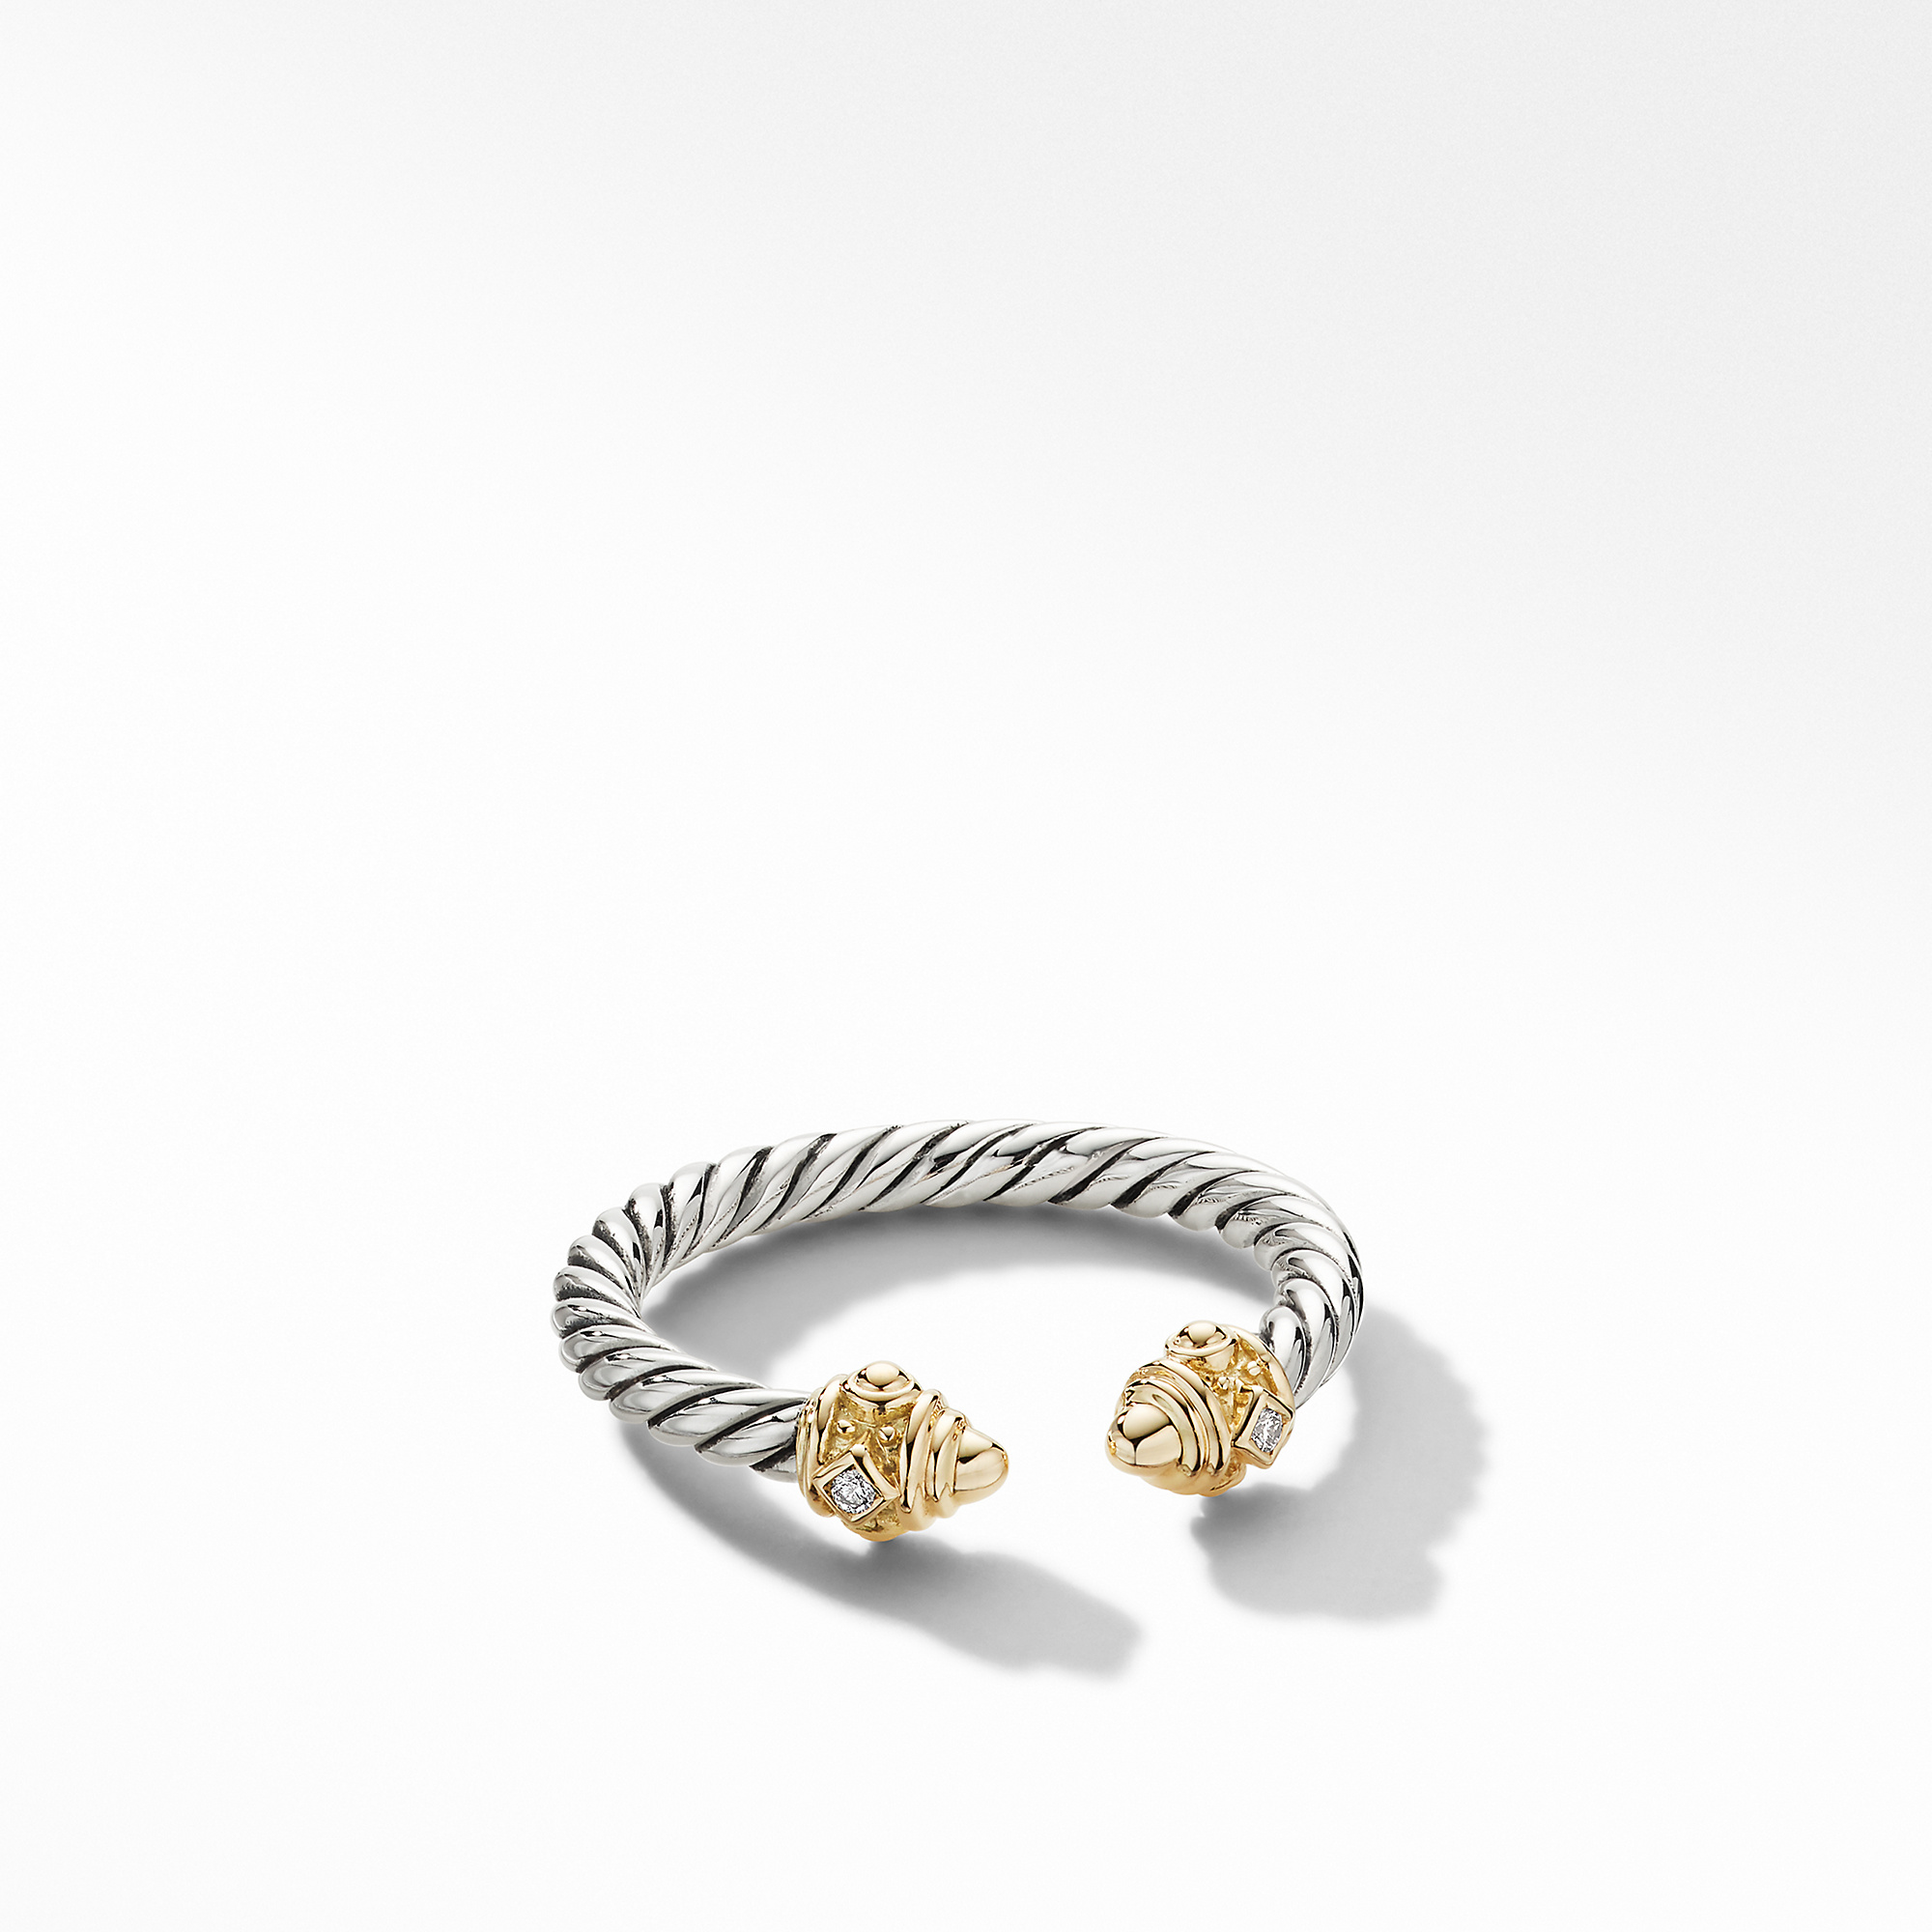 Renaissance Ring in Sterling Silver with 14K Yellow Gold Domes and Diamonds